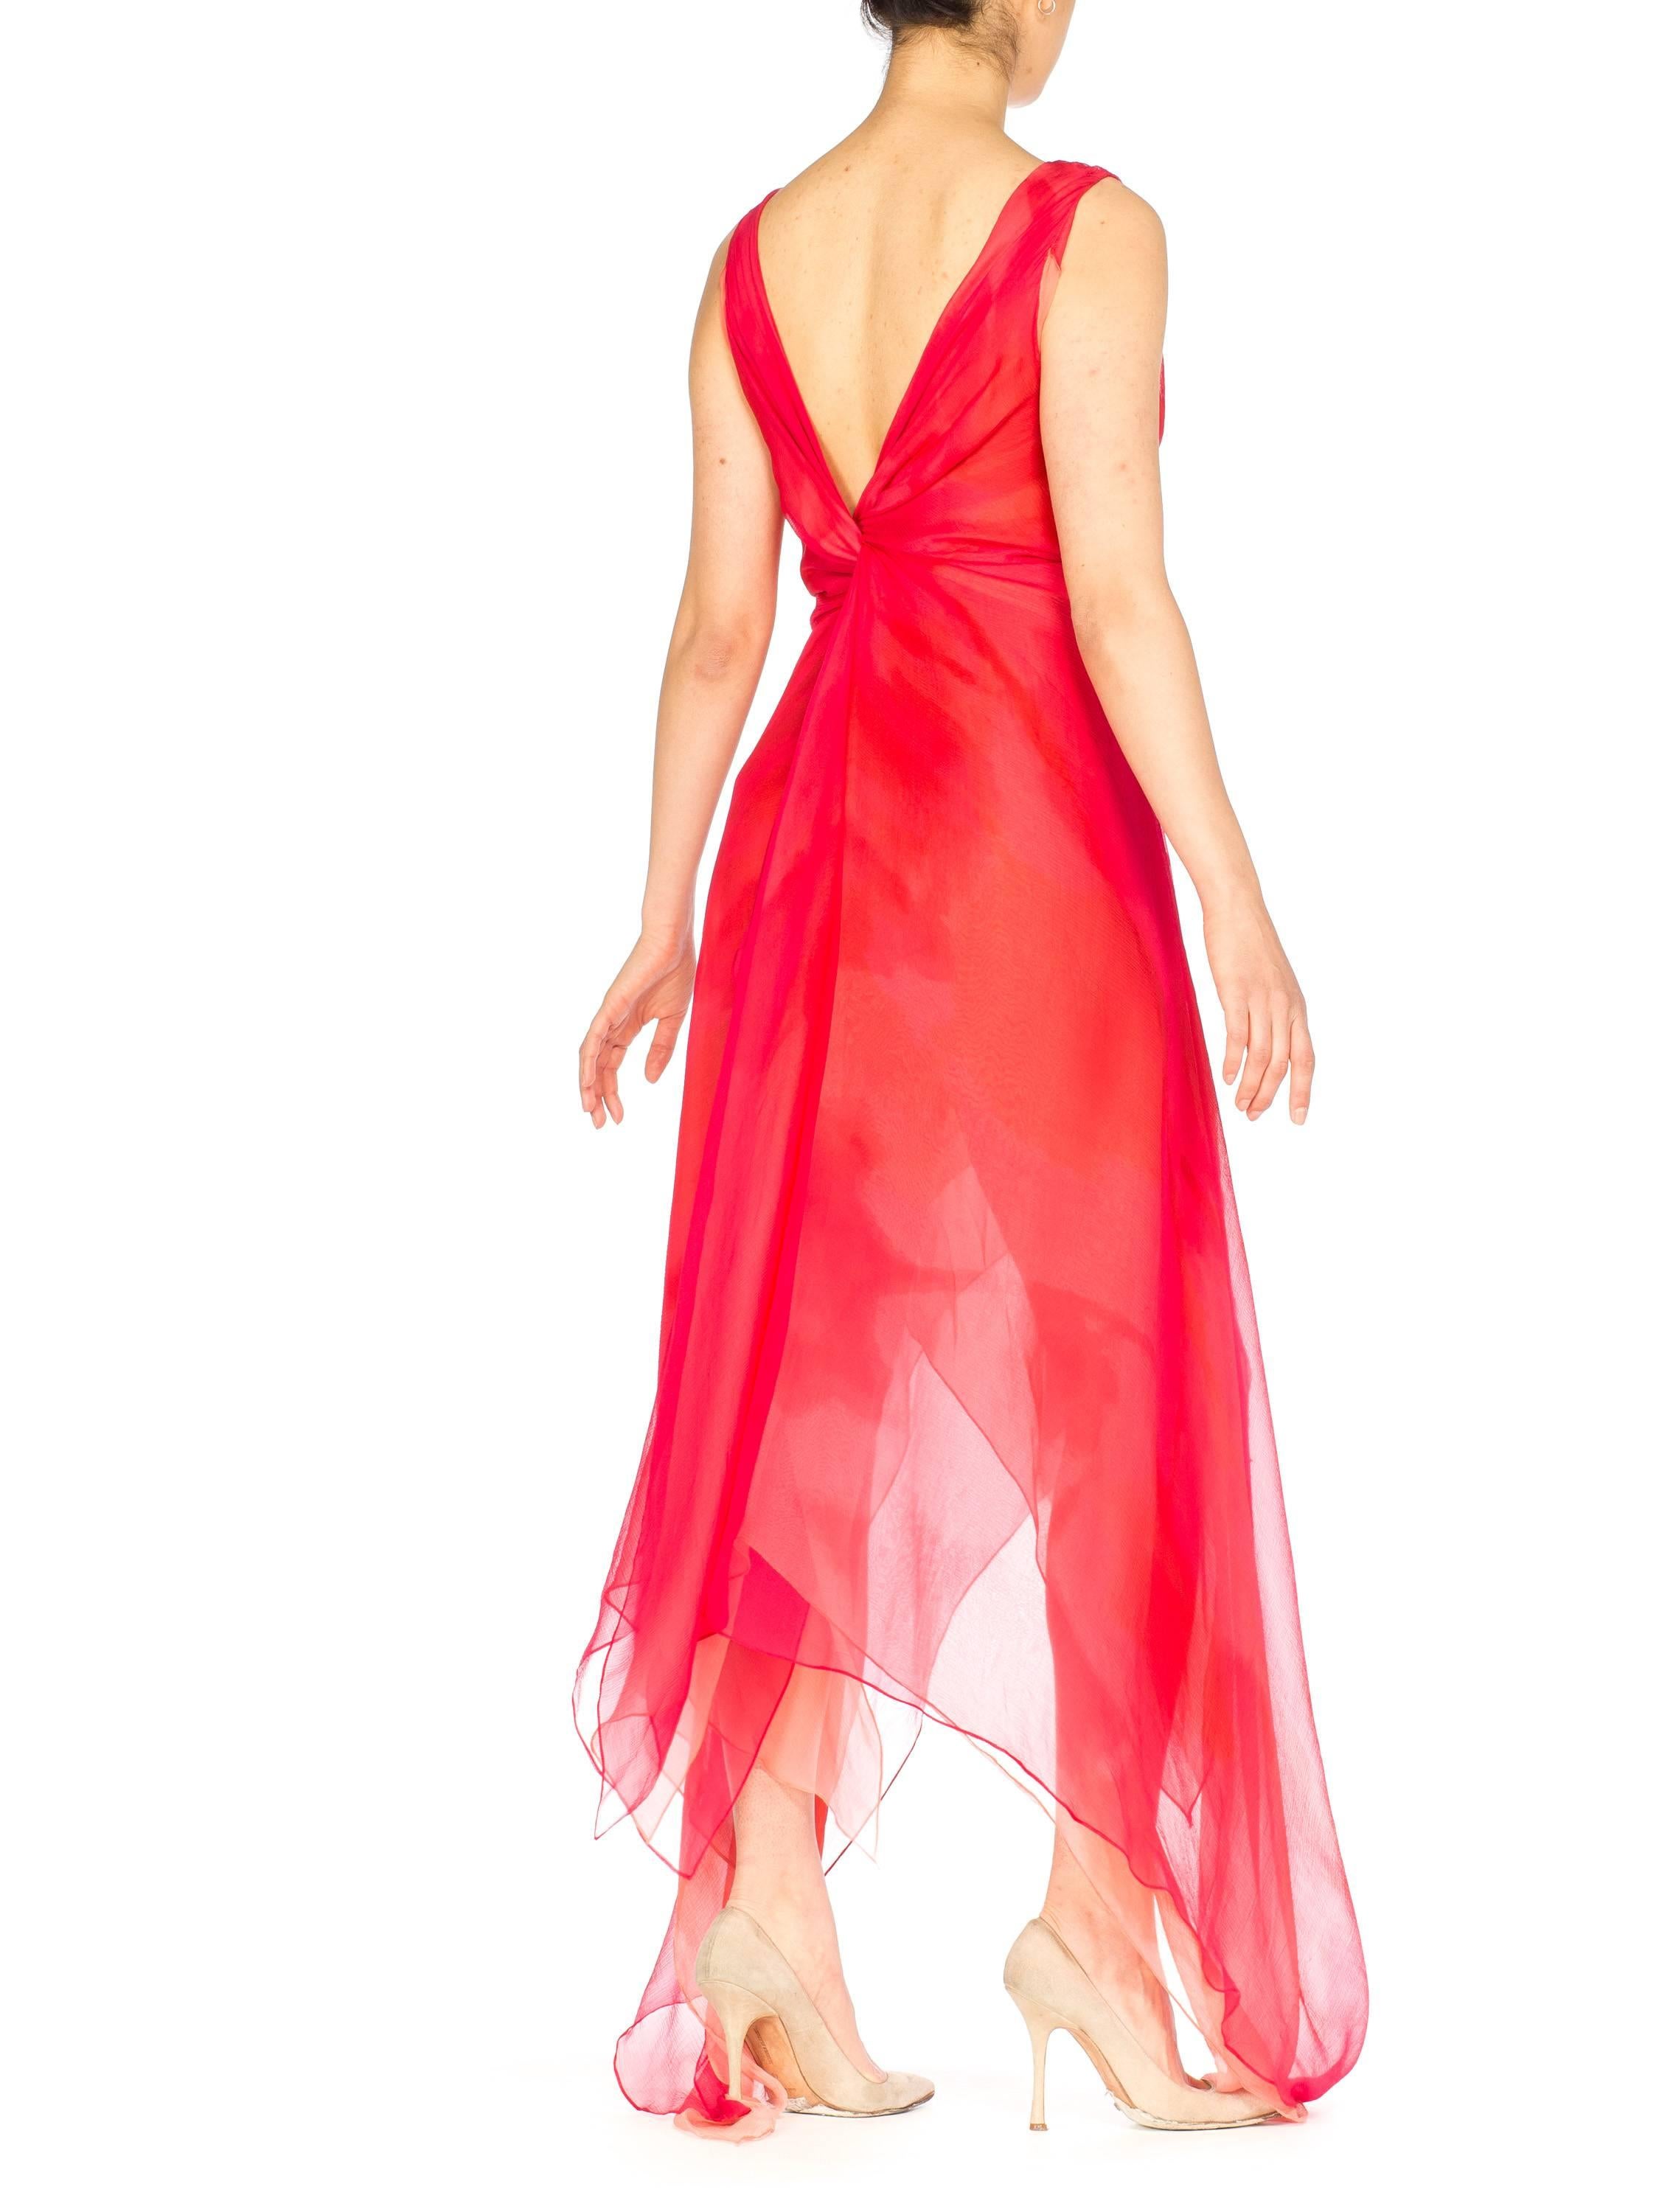 Donna Karan Layers of Red and Pink Chiffon Gown, 1990s  3